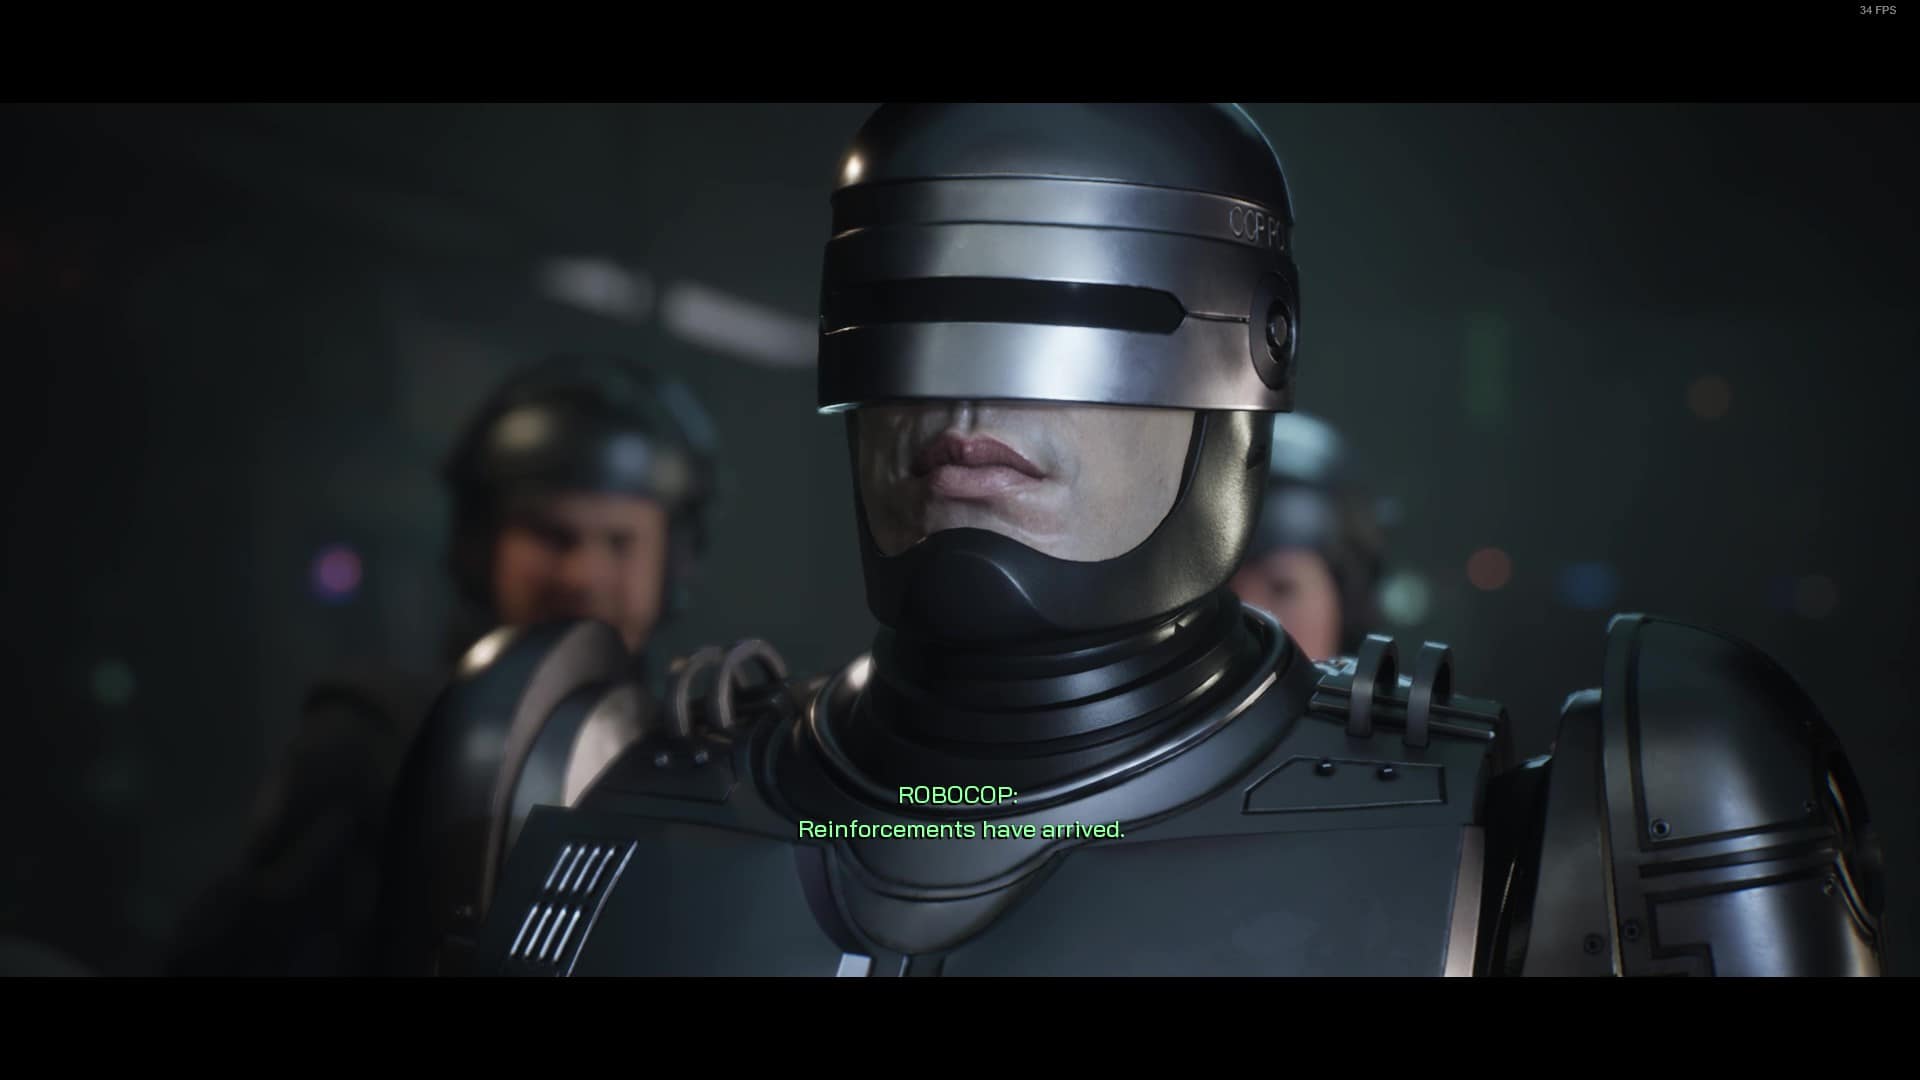 RoboCop Review: RoboCop standing in front of two other police officers.